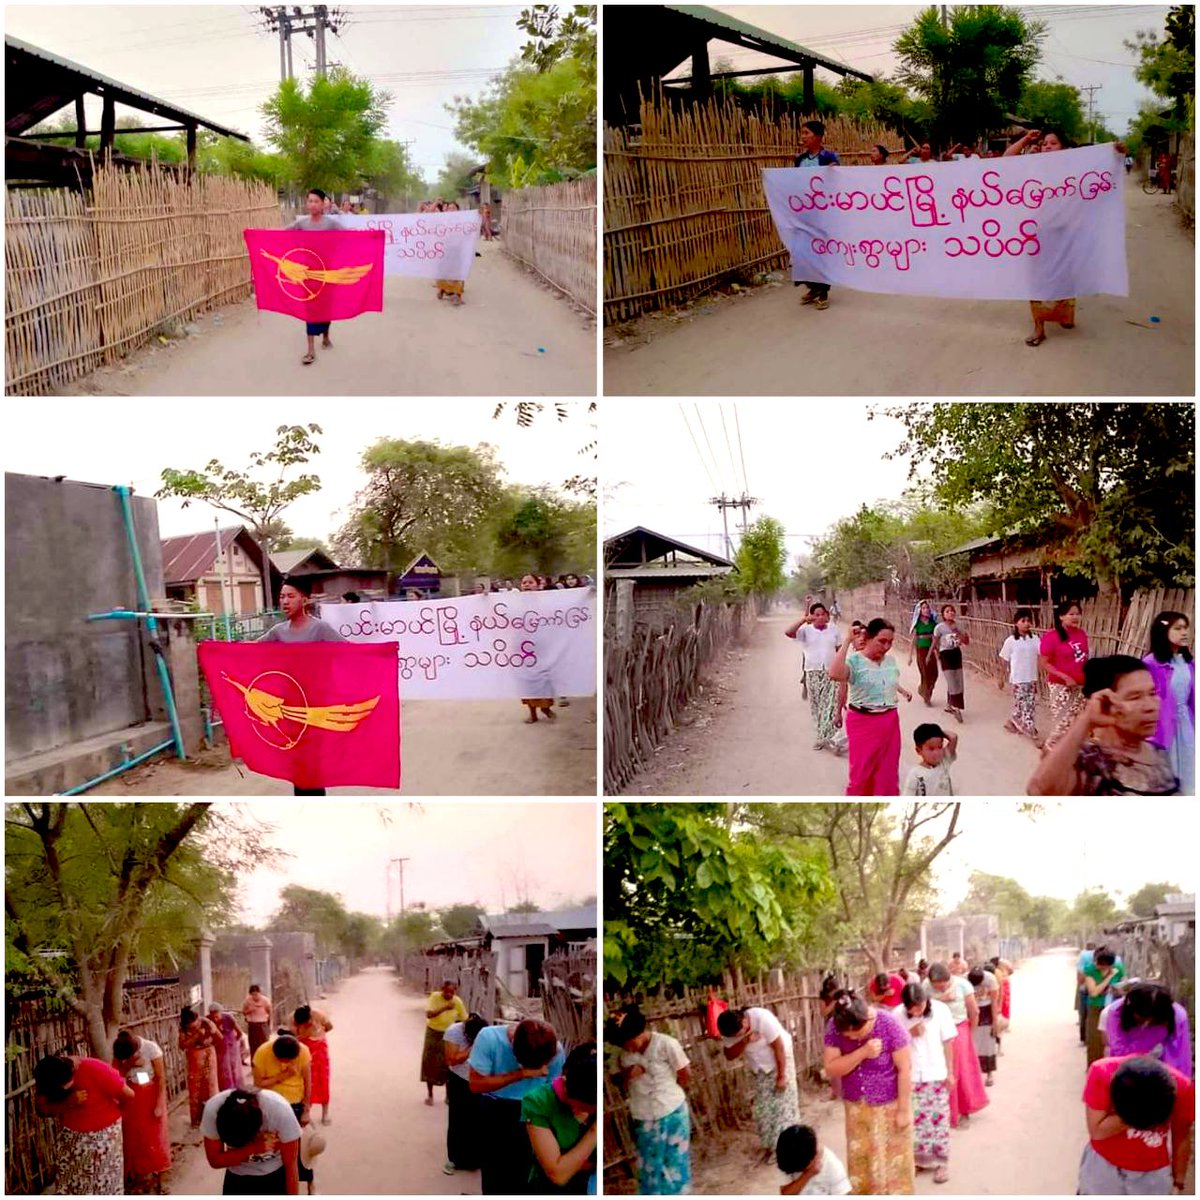 Northern Villages Strike Column from #Yinmarbin Twp staged a rally against the #MilitaryDictatorship in #Yinmarbin Township, #Sagaing Division on April 27.
#WhatsHappeninglnMyanmar 
#2024Apr27Coup